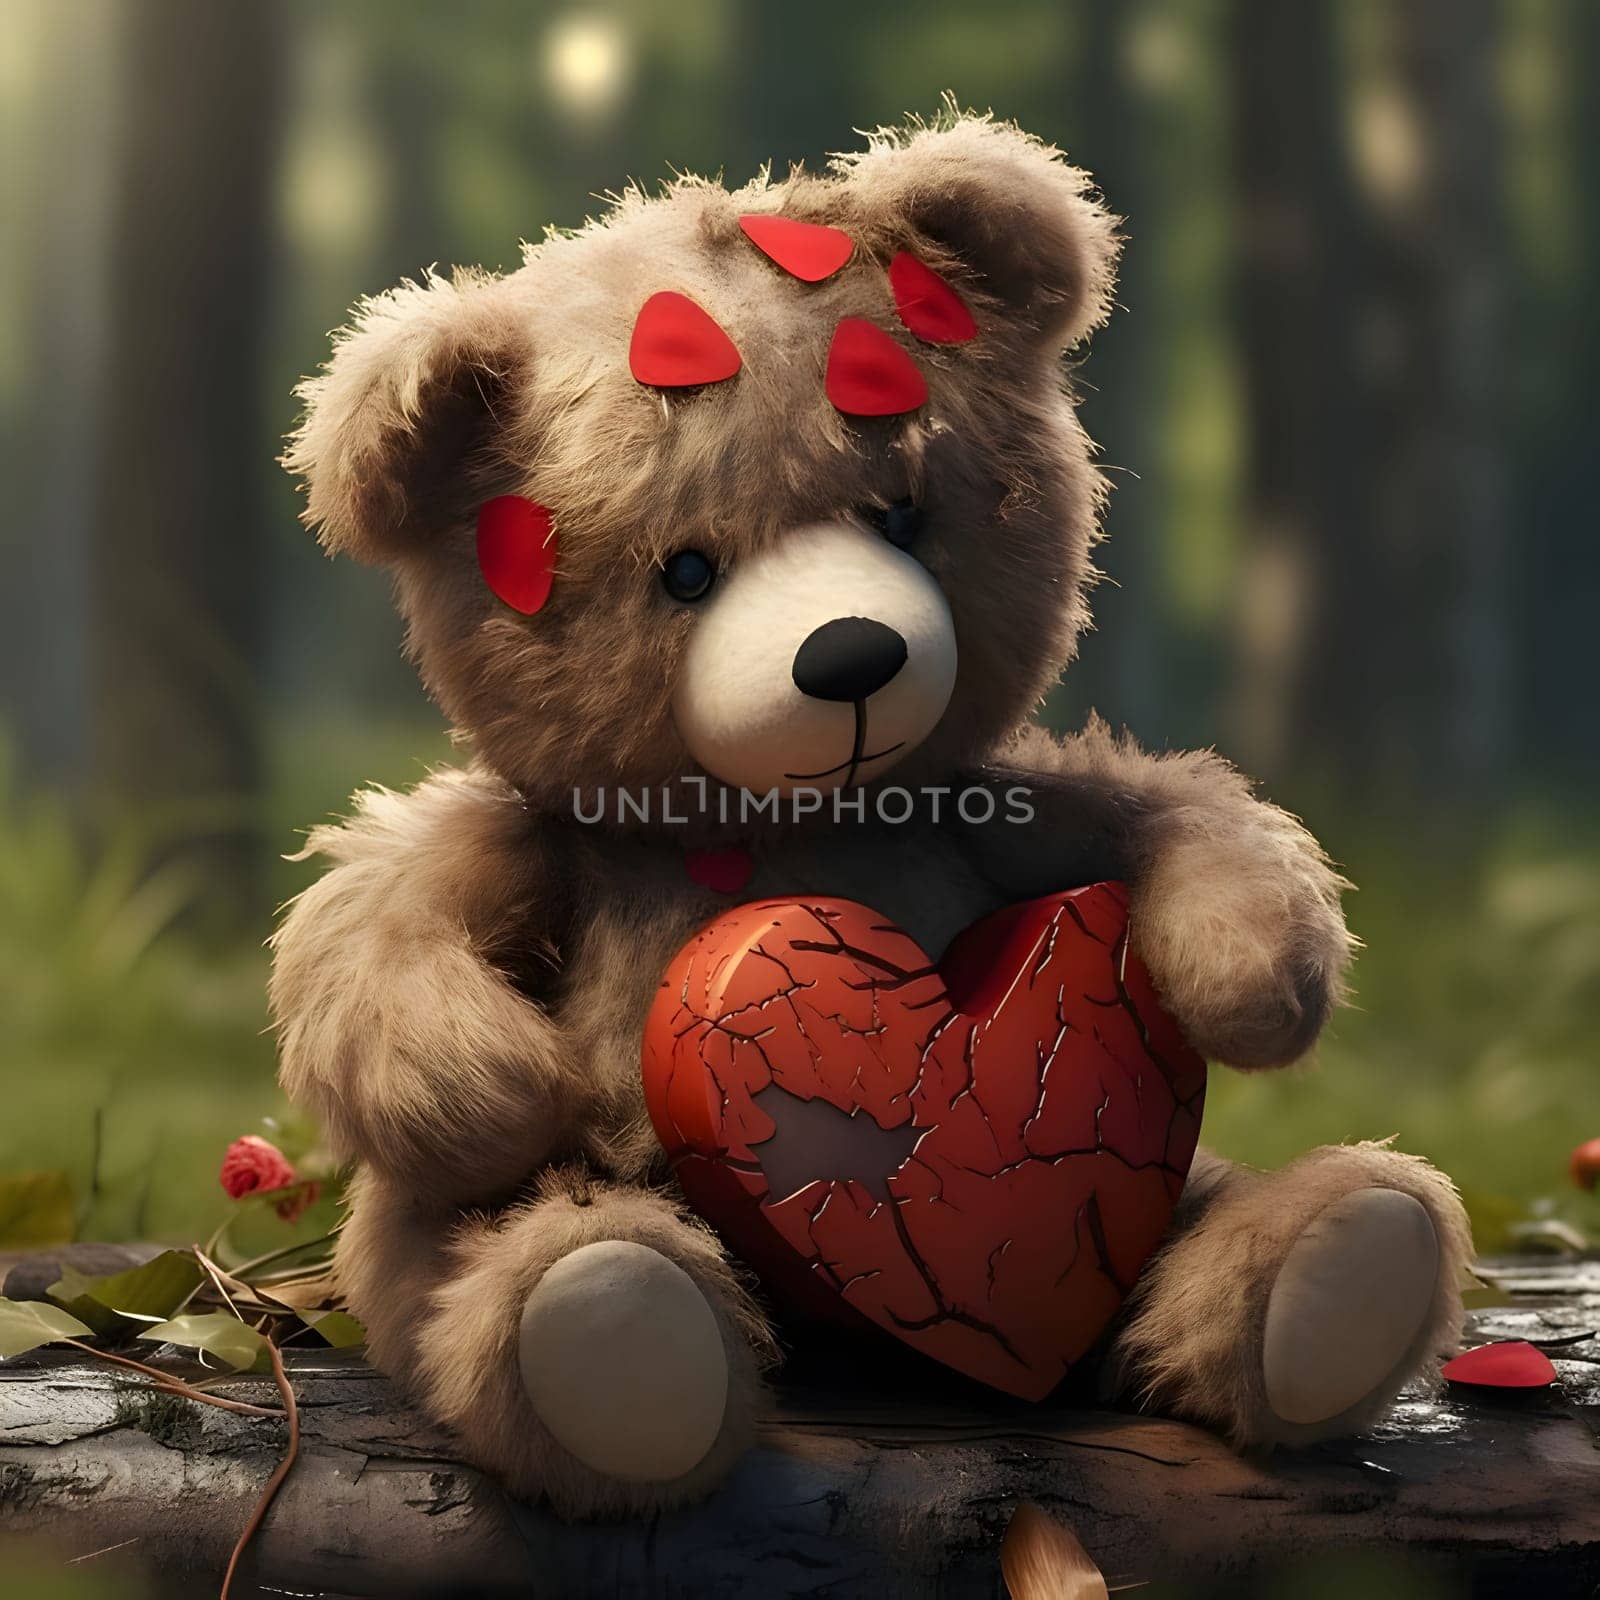 Plush teddy bear with rose petals on its head and a broken red heart in the forest. Heart as a symbol of affection and love. The time of falling in love and love.